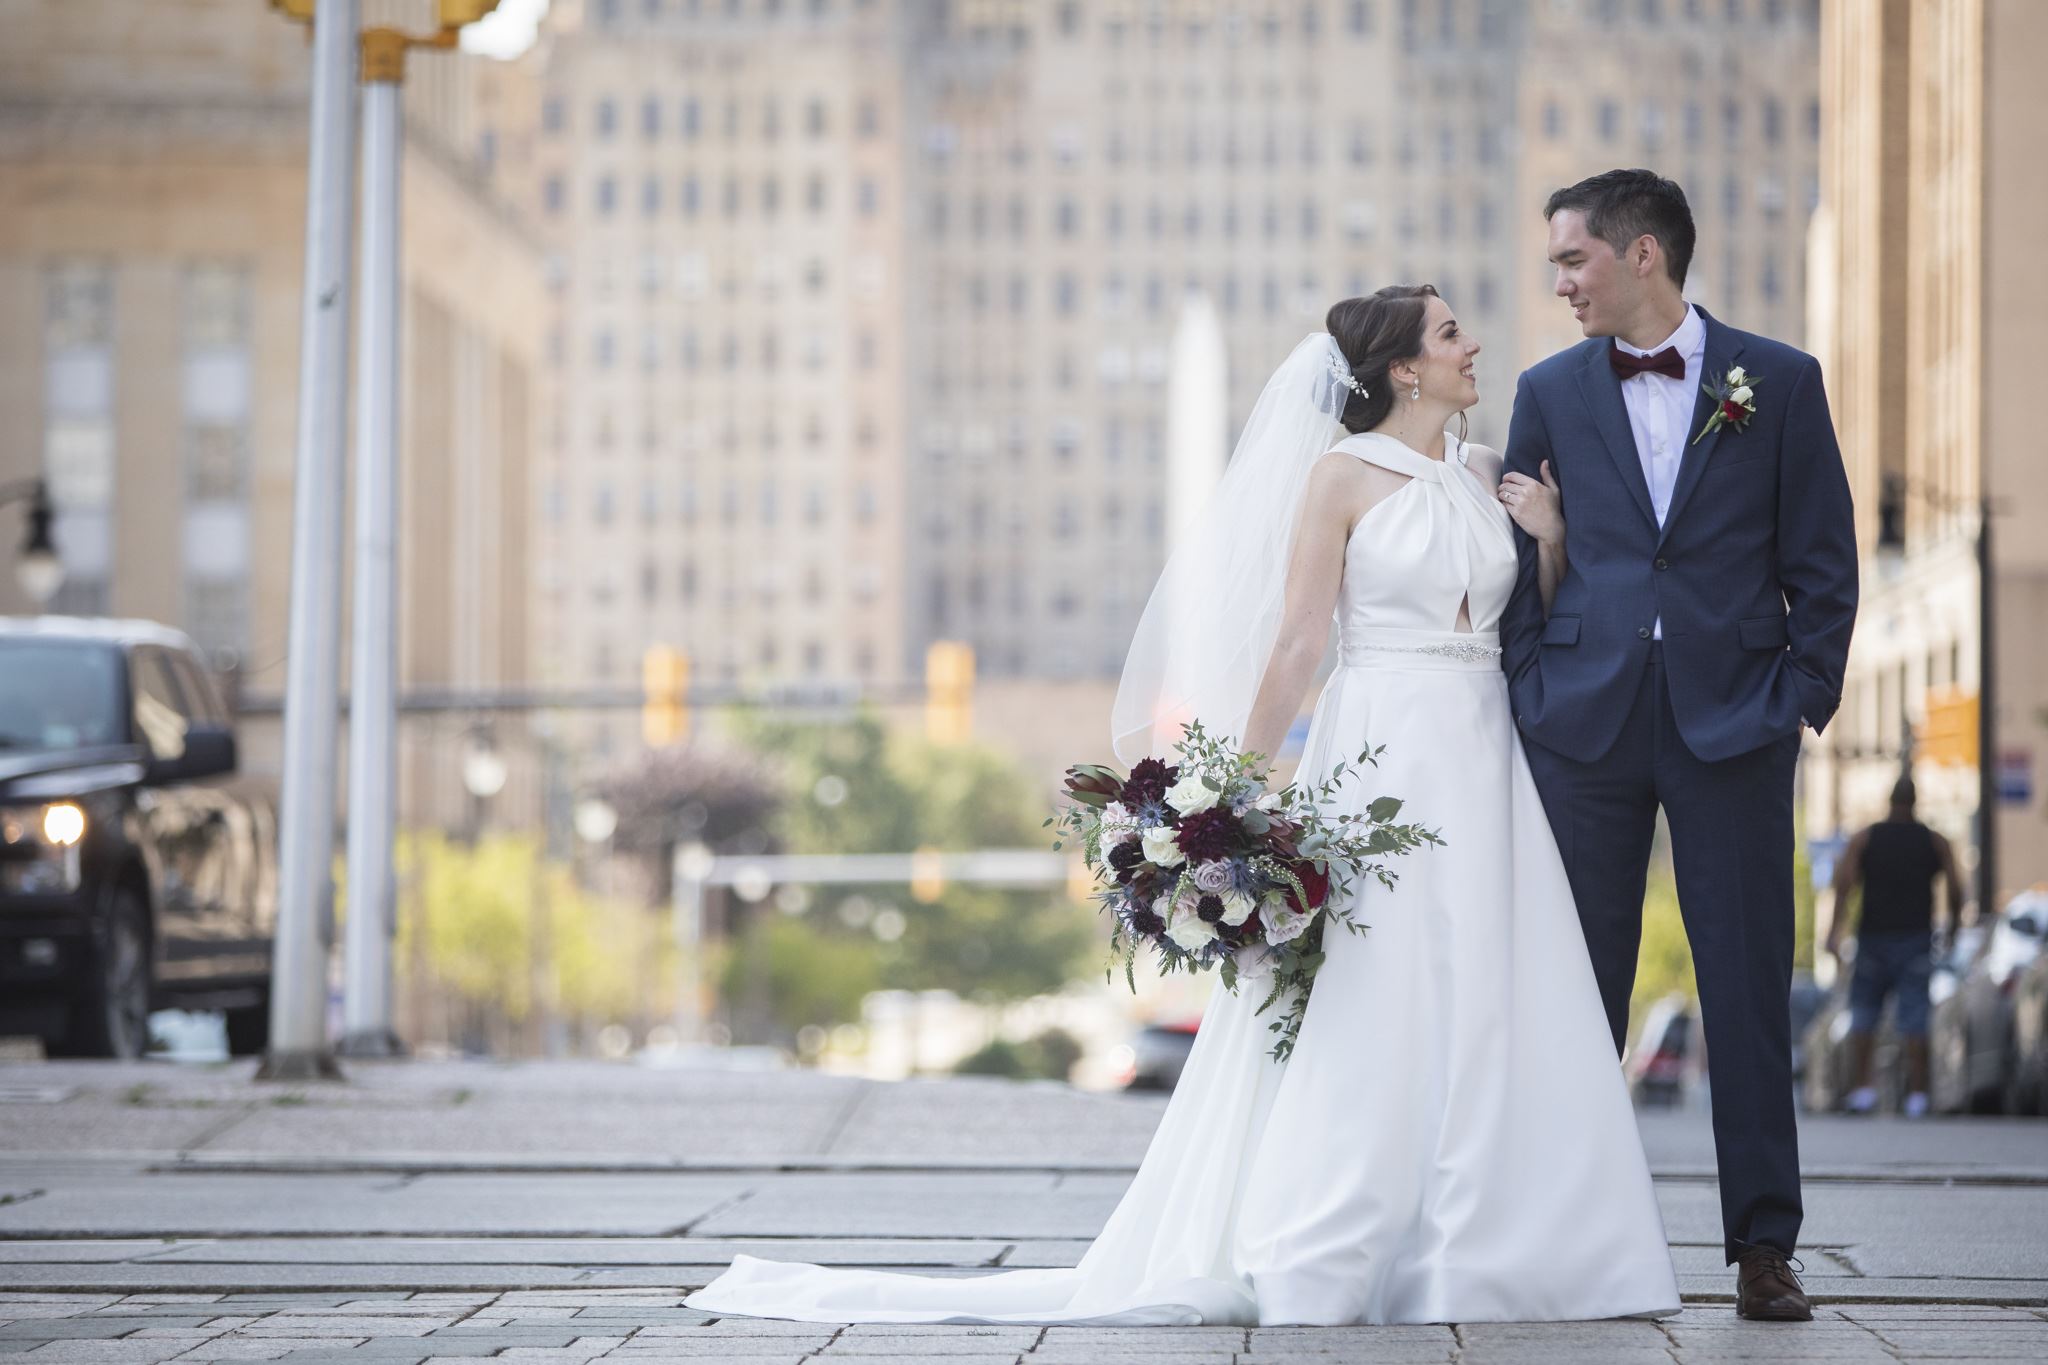 Bride and groom standing together in the city on their wedding day